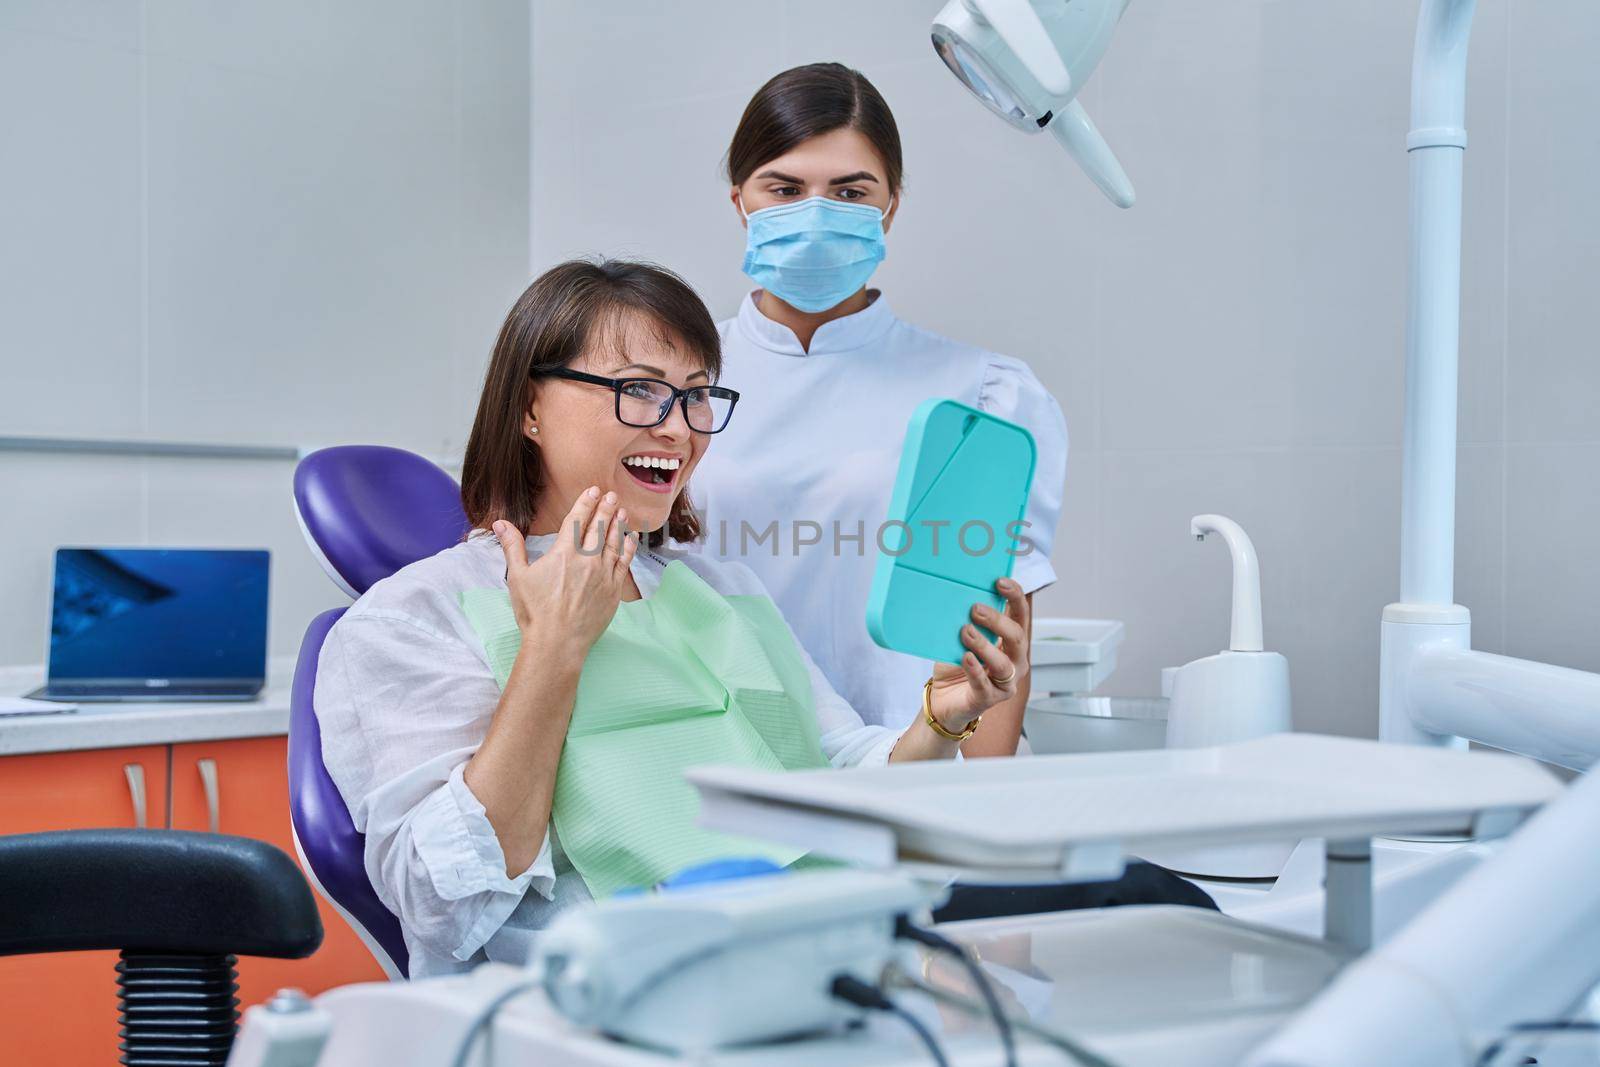 Happy middle aged woman together with dentist, patient sitting in dental chair looking at mirror. Prosthetics, treatment, implantation, dental teeth health, beauty care concept